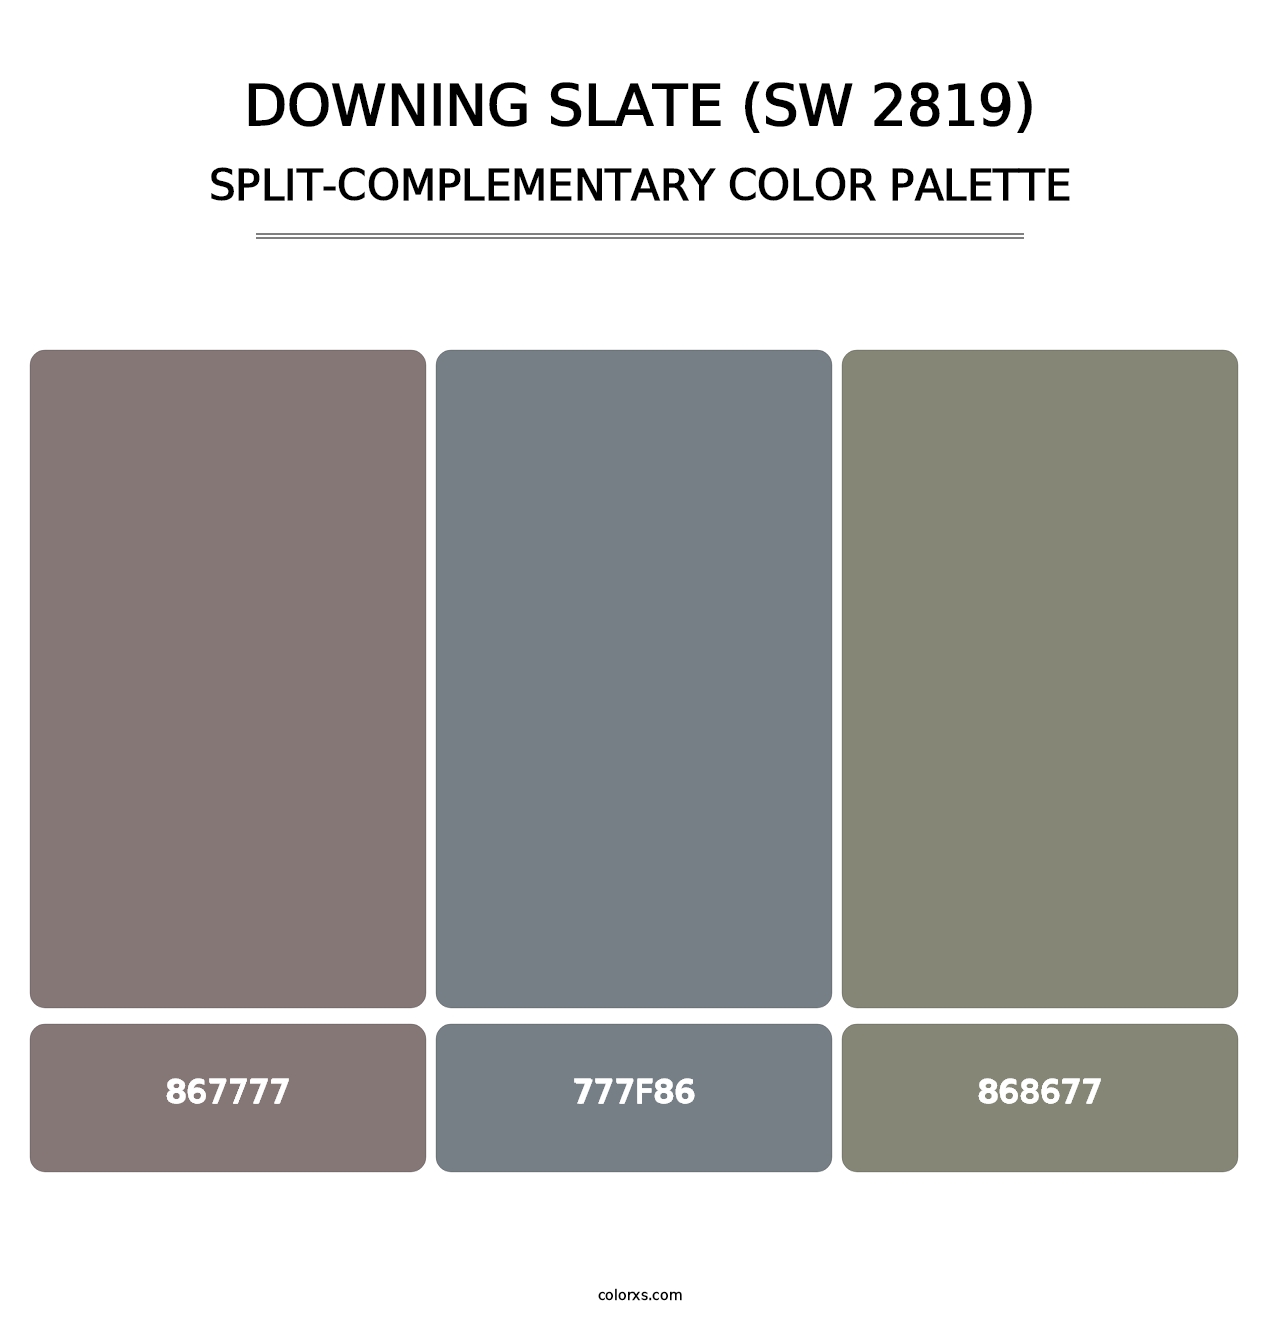 Downing Slate (SW 2819) - Split-Complementary Color Palette